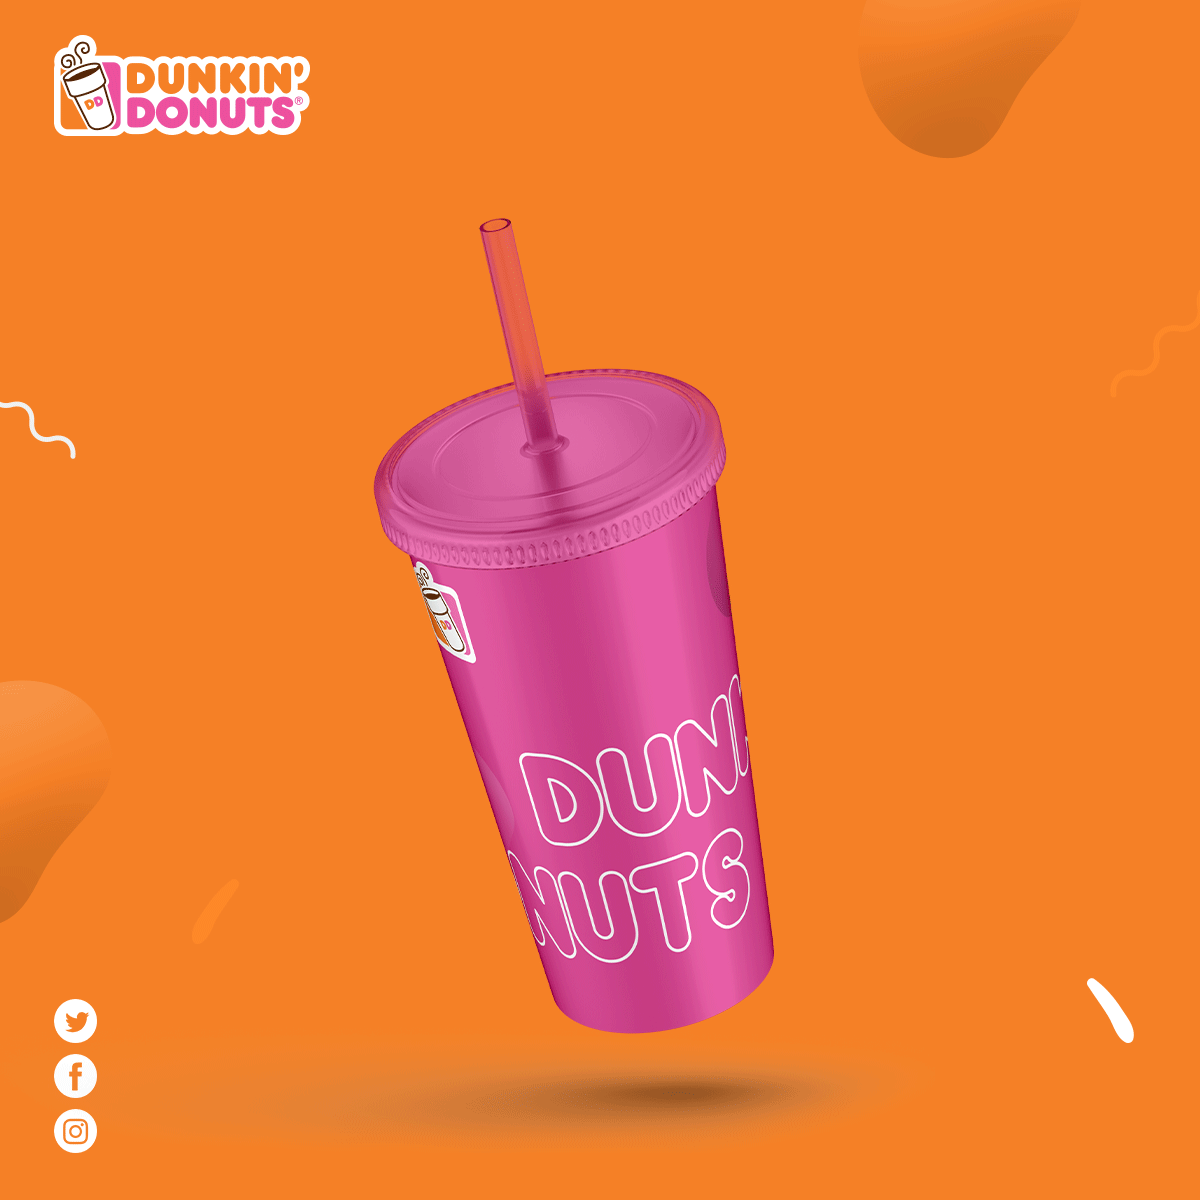 Coffee donut Donuts drinks dunkin Hot media social sweet colors